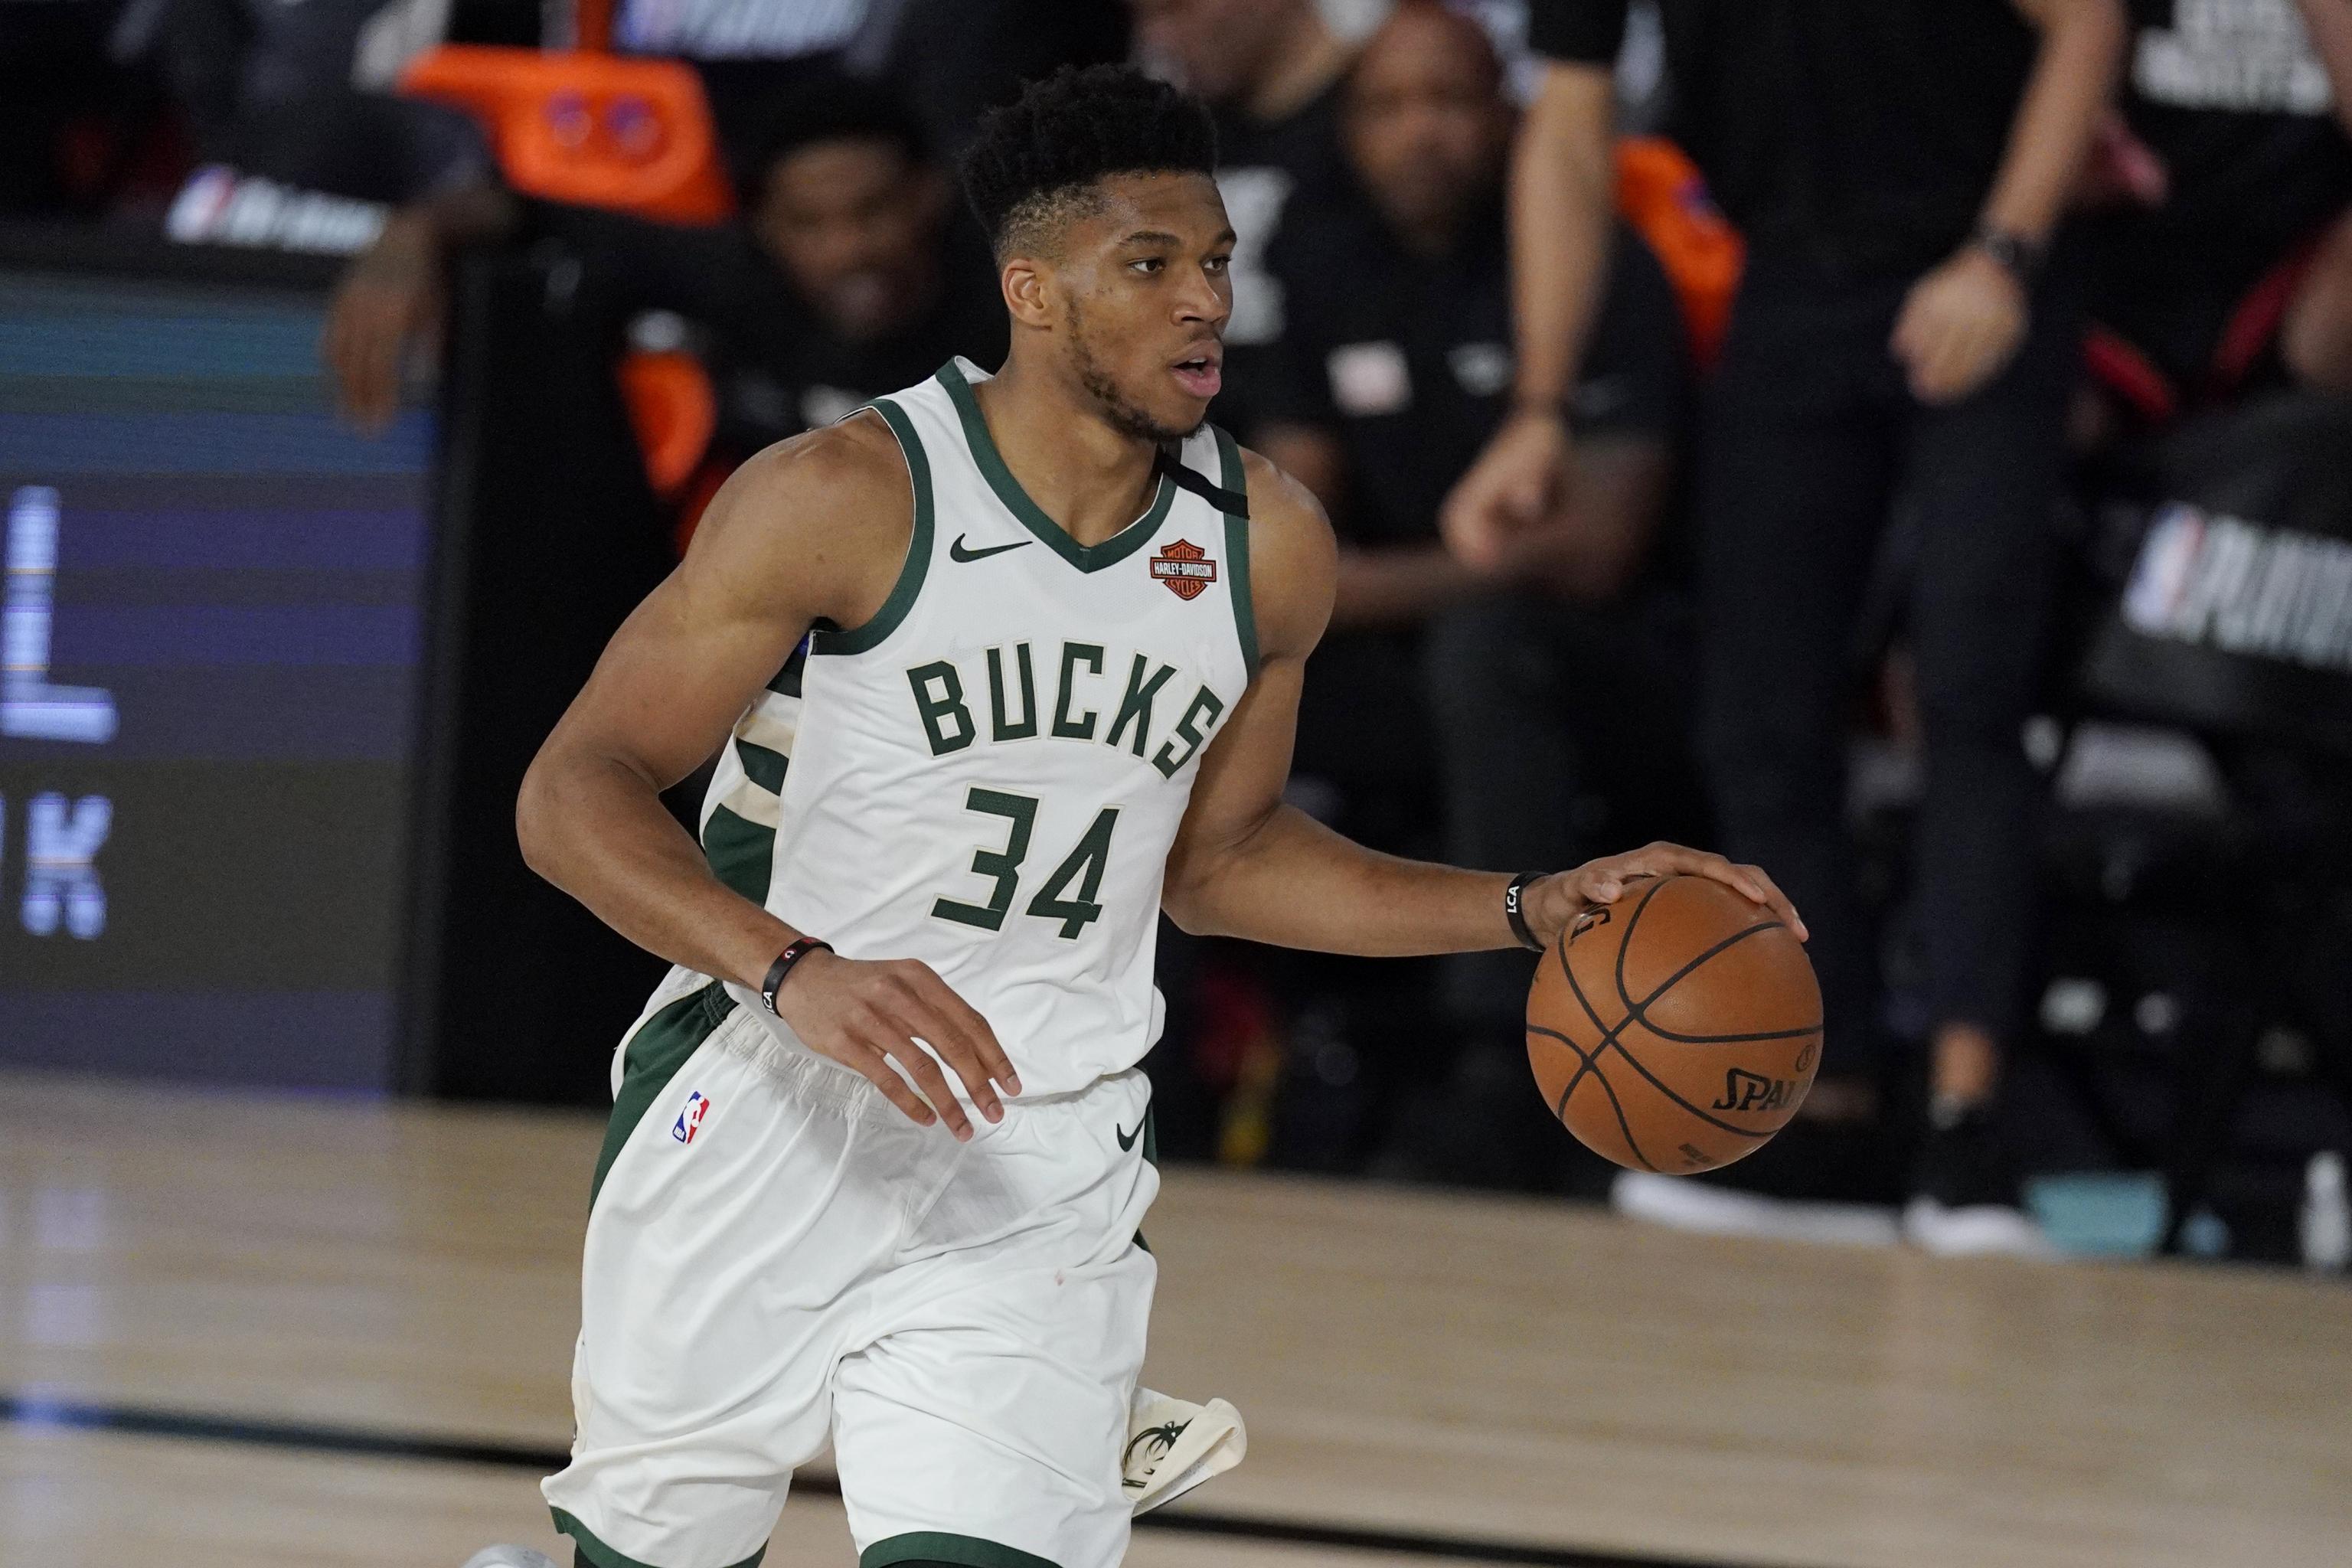 Giannis Antetokounmpo Rookie Card Sells For 1 812m Breaks Lebron James Record Bleacher Report Latest News Videos And Highlights